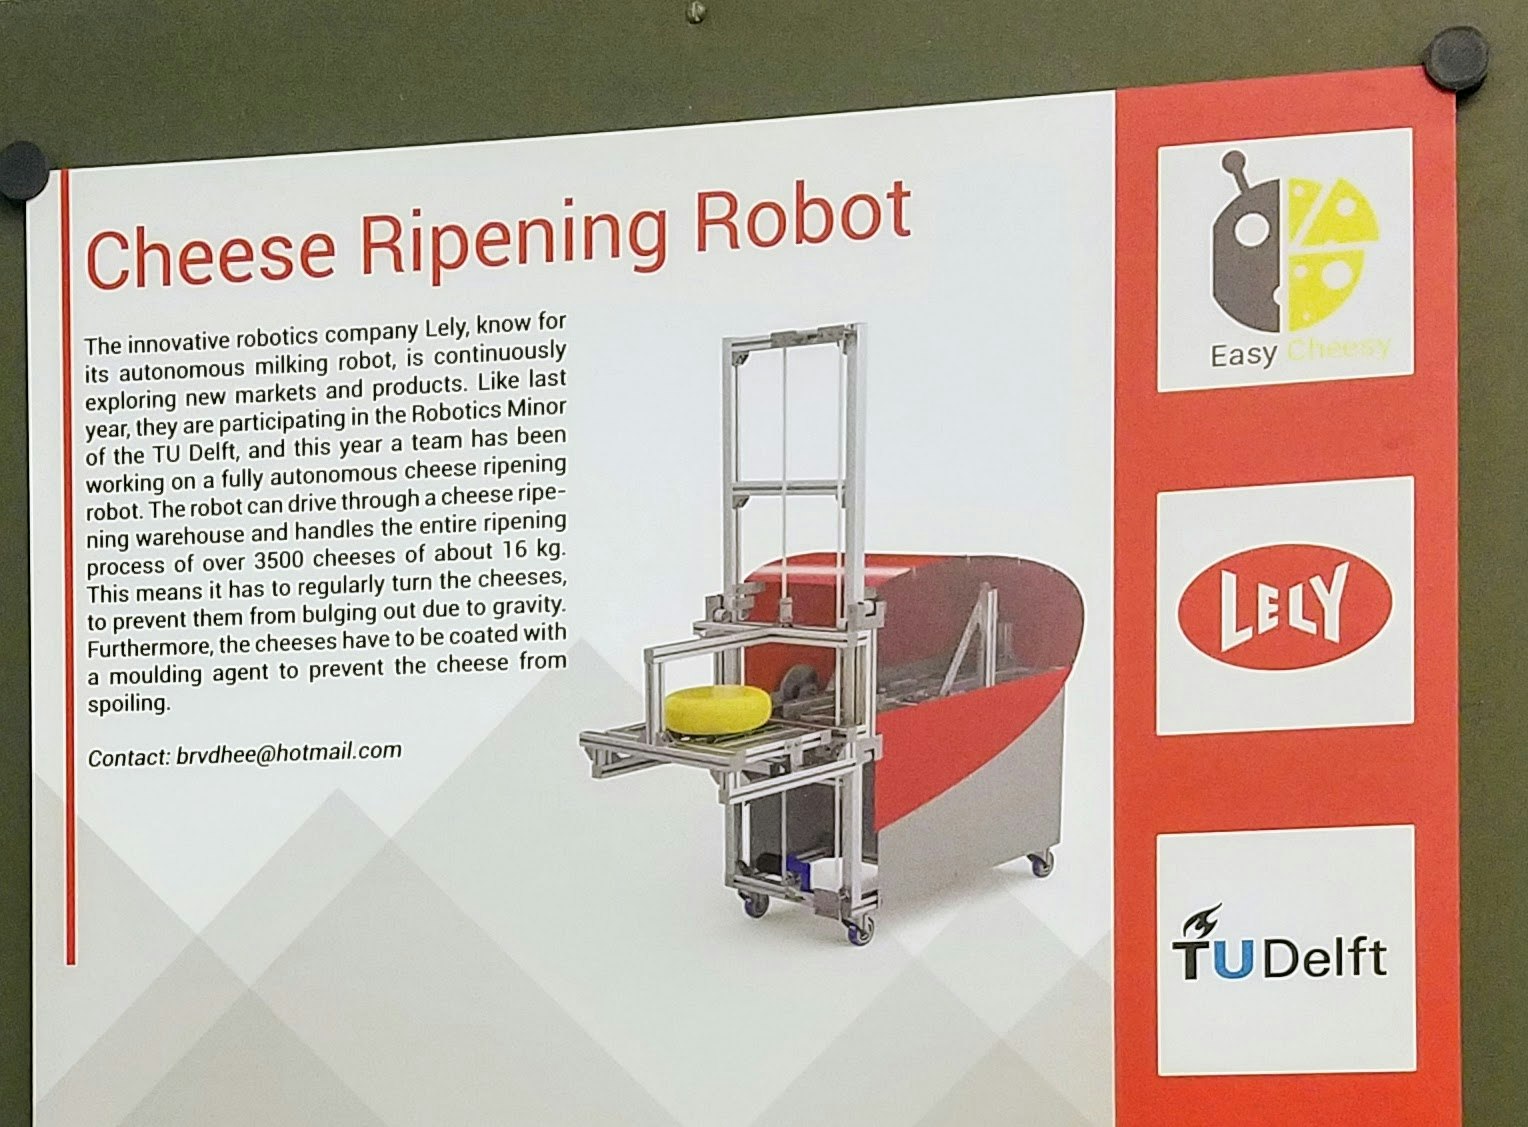 Cheese-flipping robot built for Lely